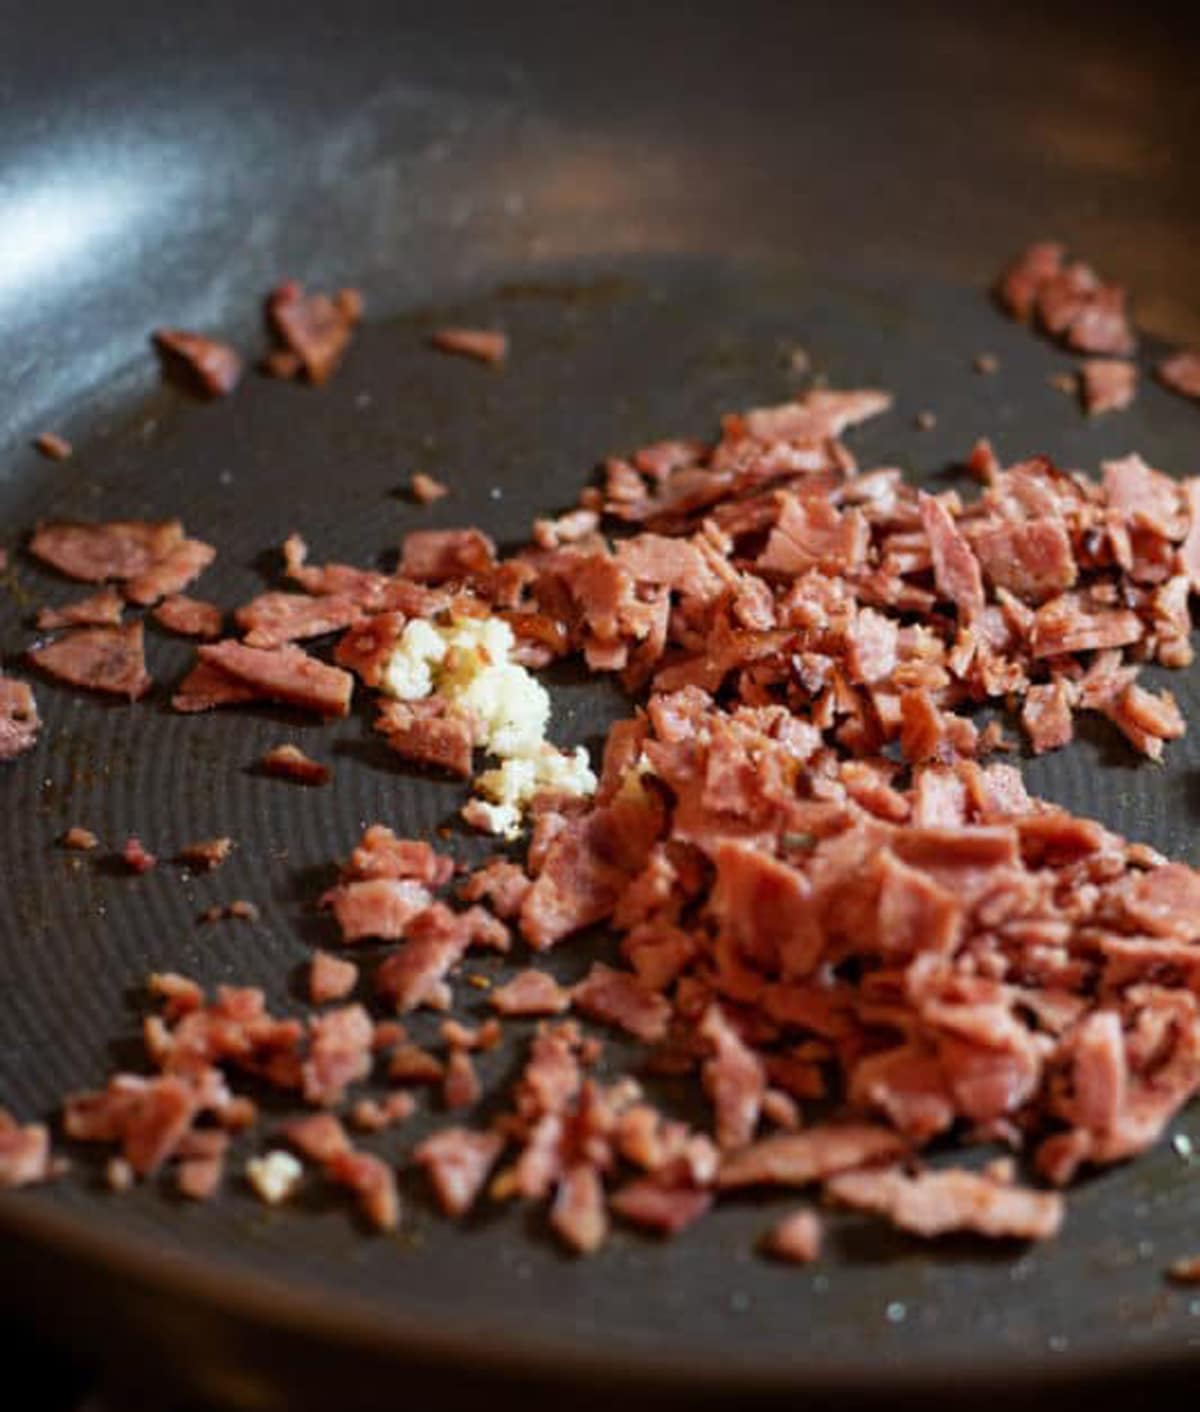 Turkey bacon and garlic being sauteed in a pan.